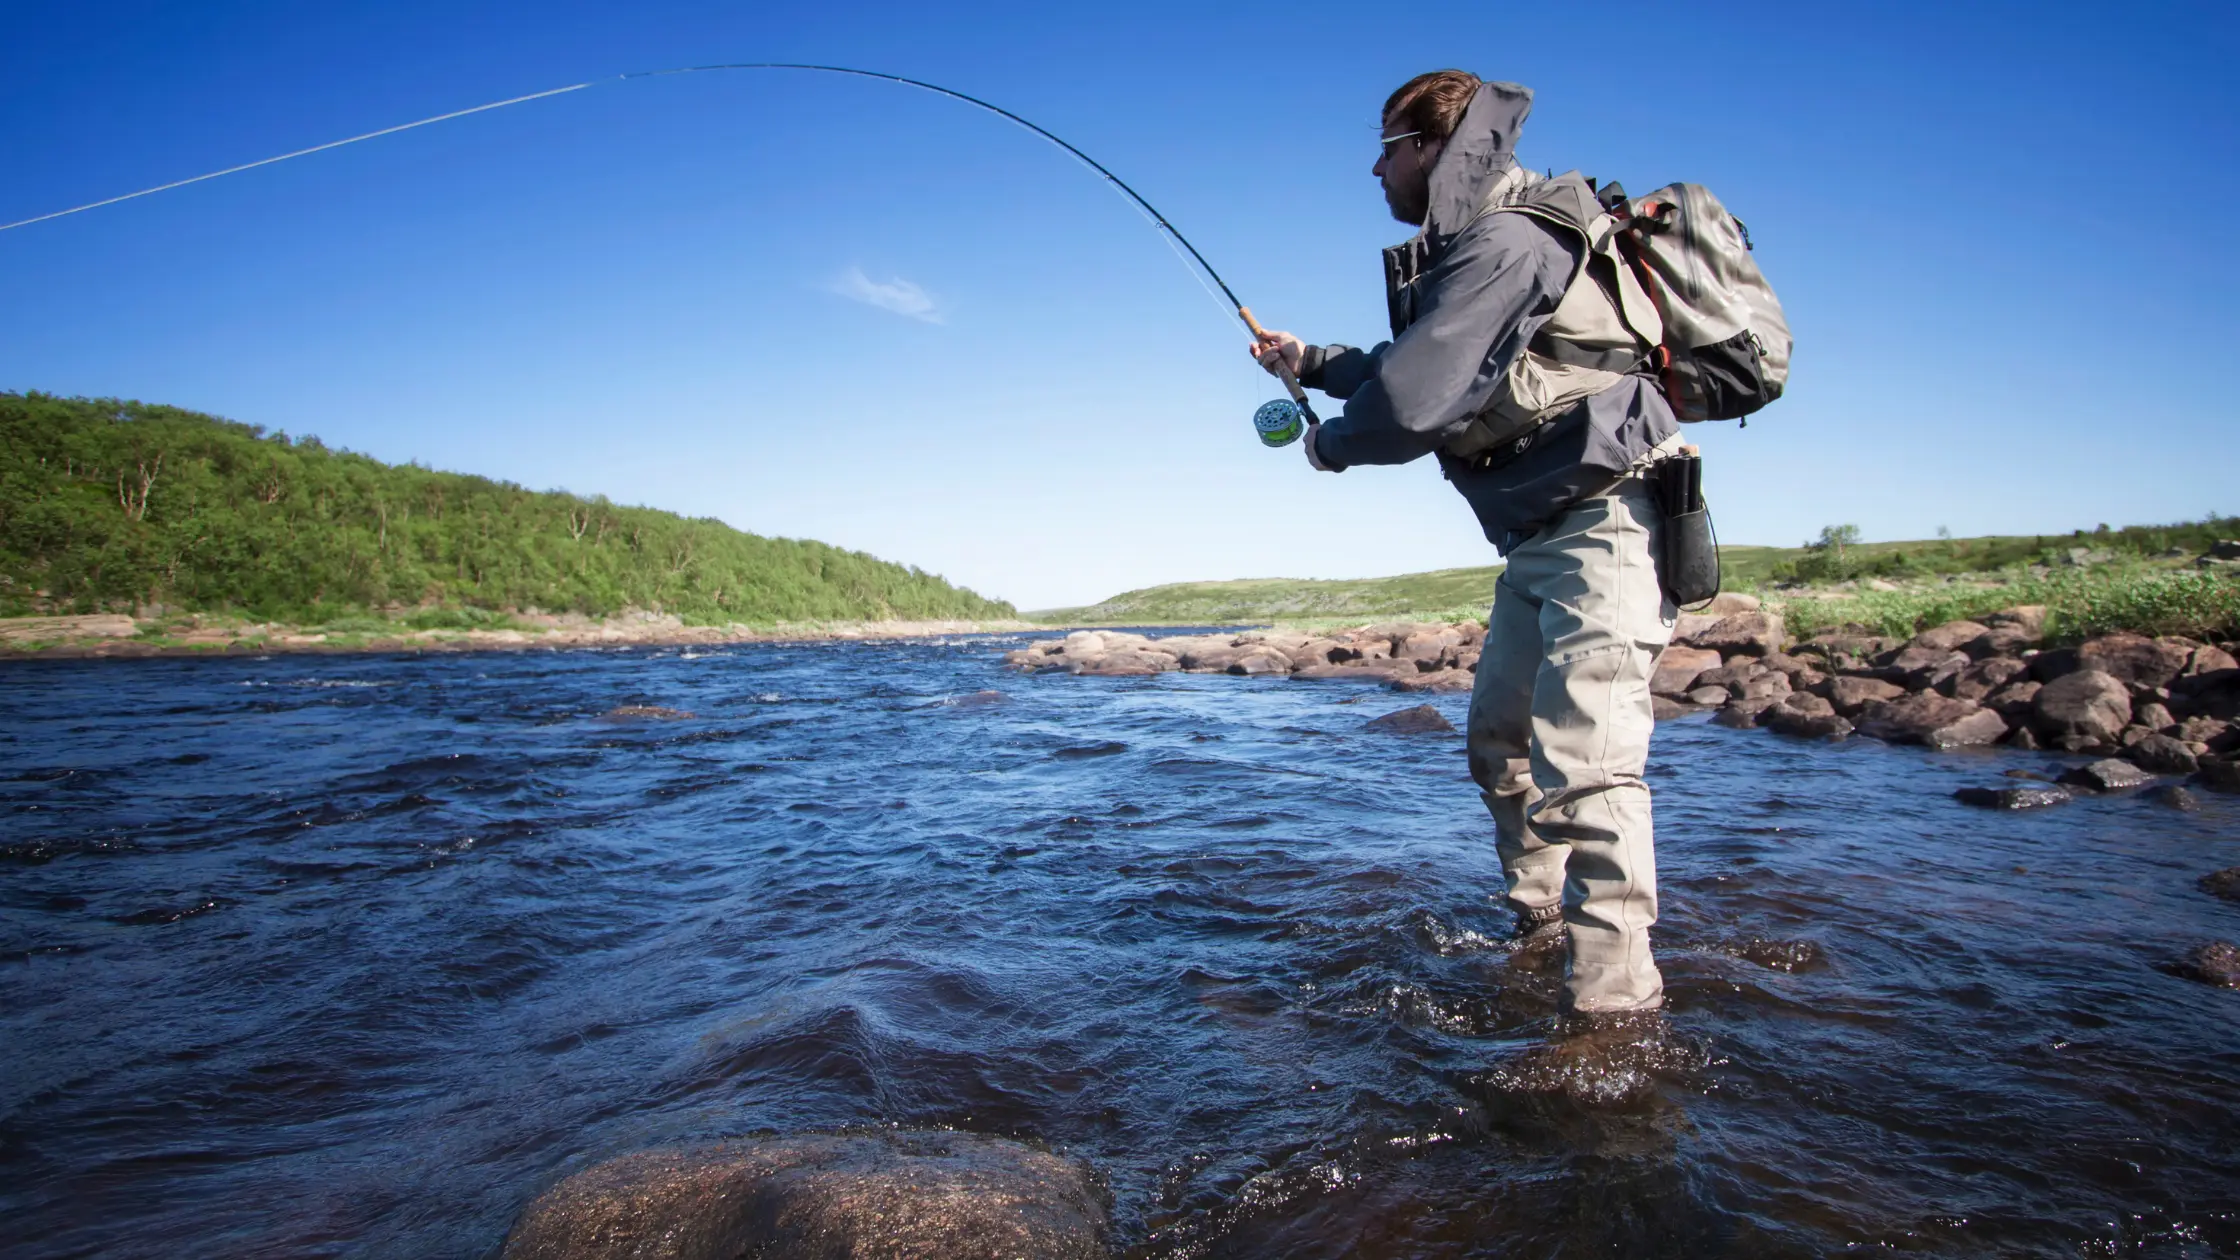 Is fly fishing for the rich